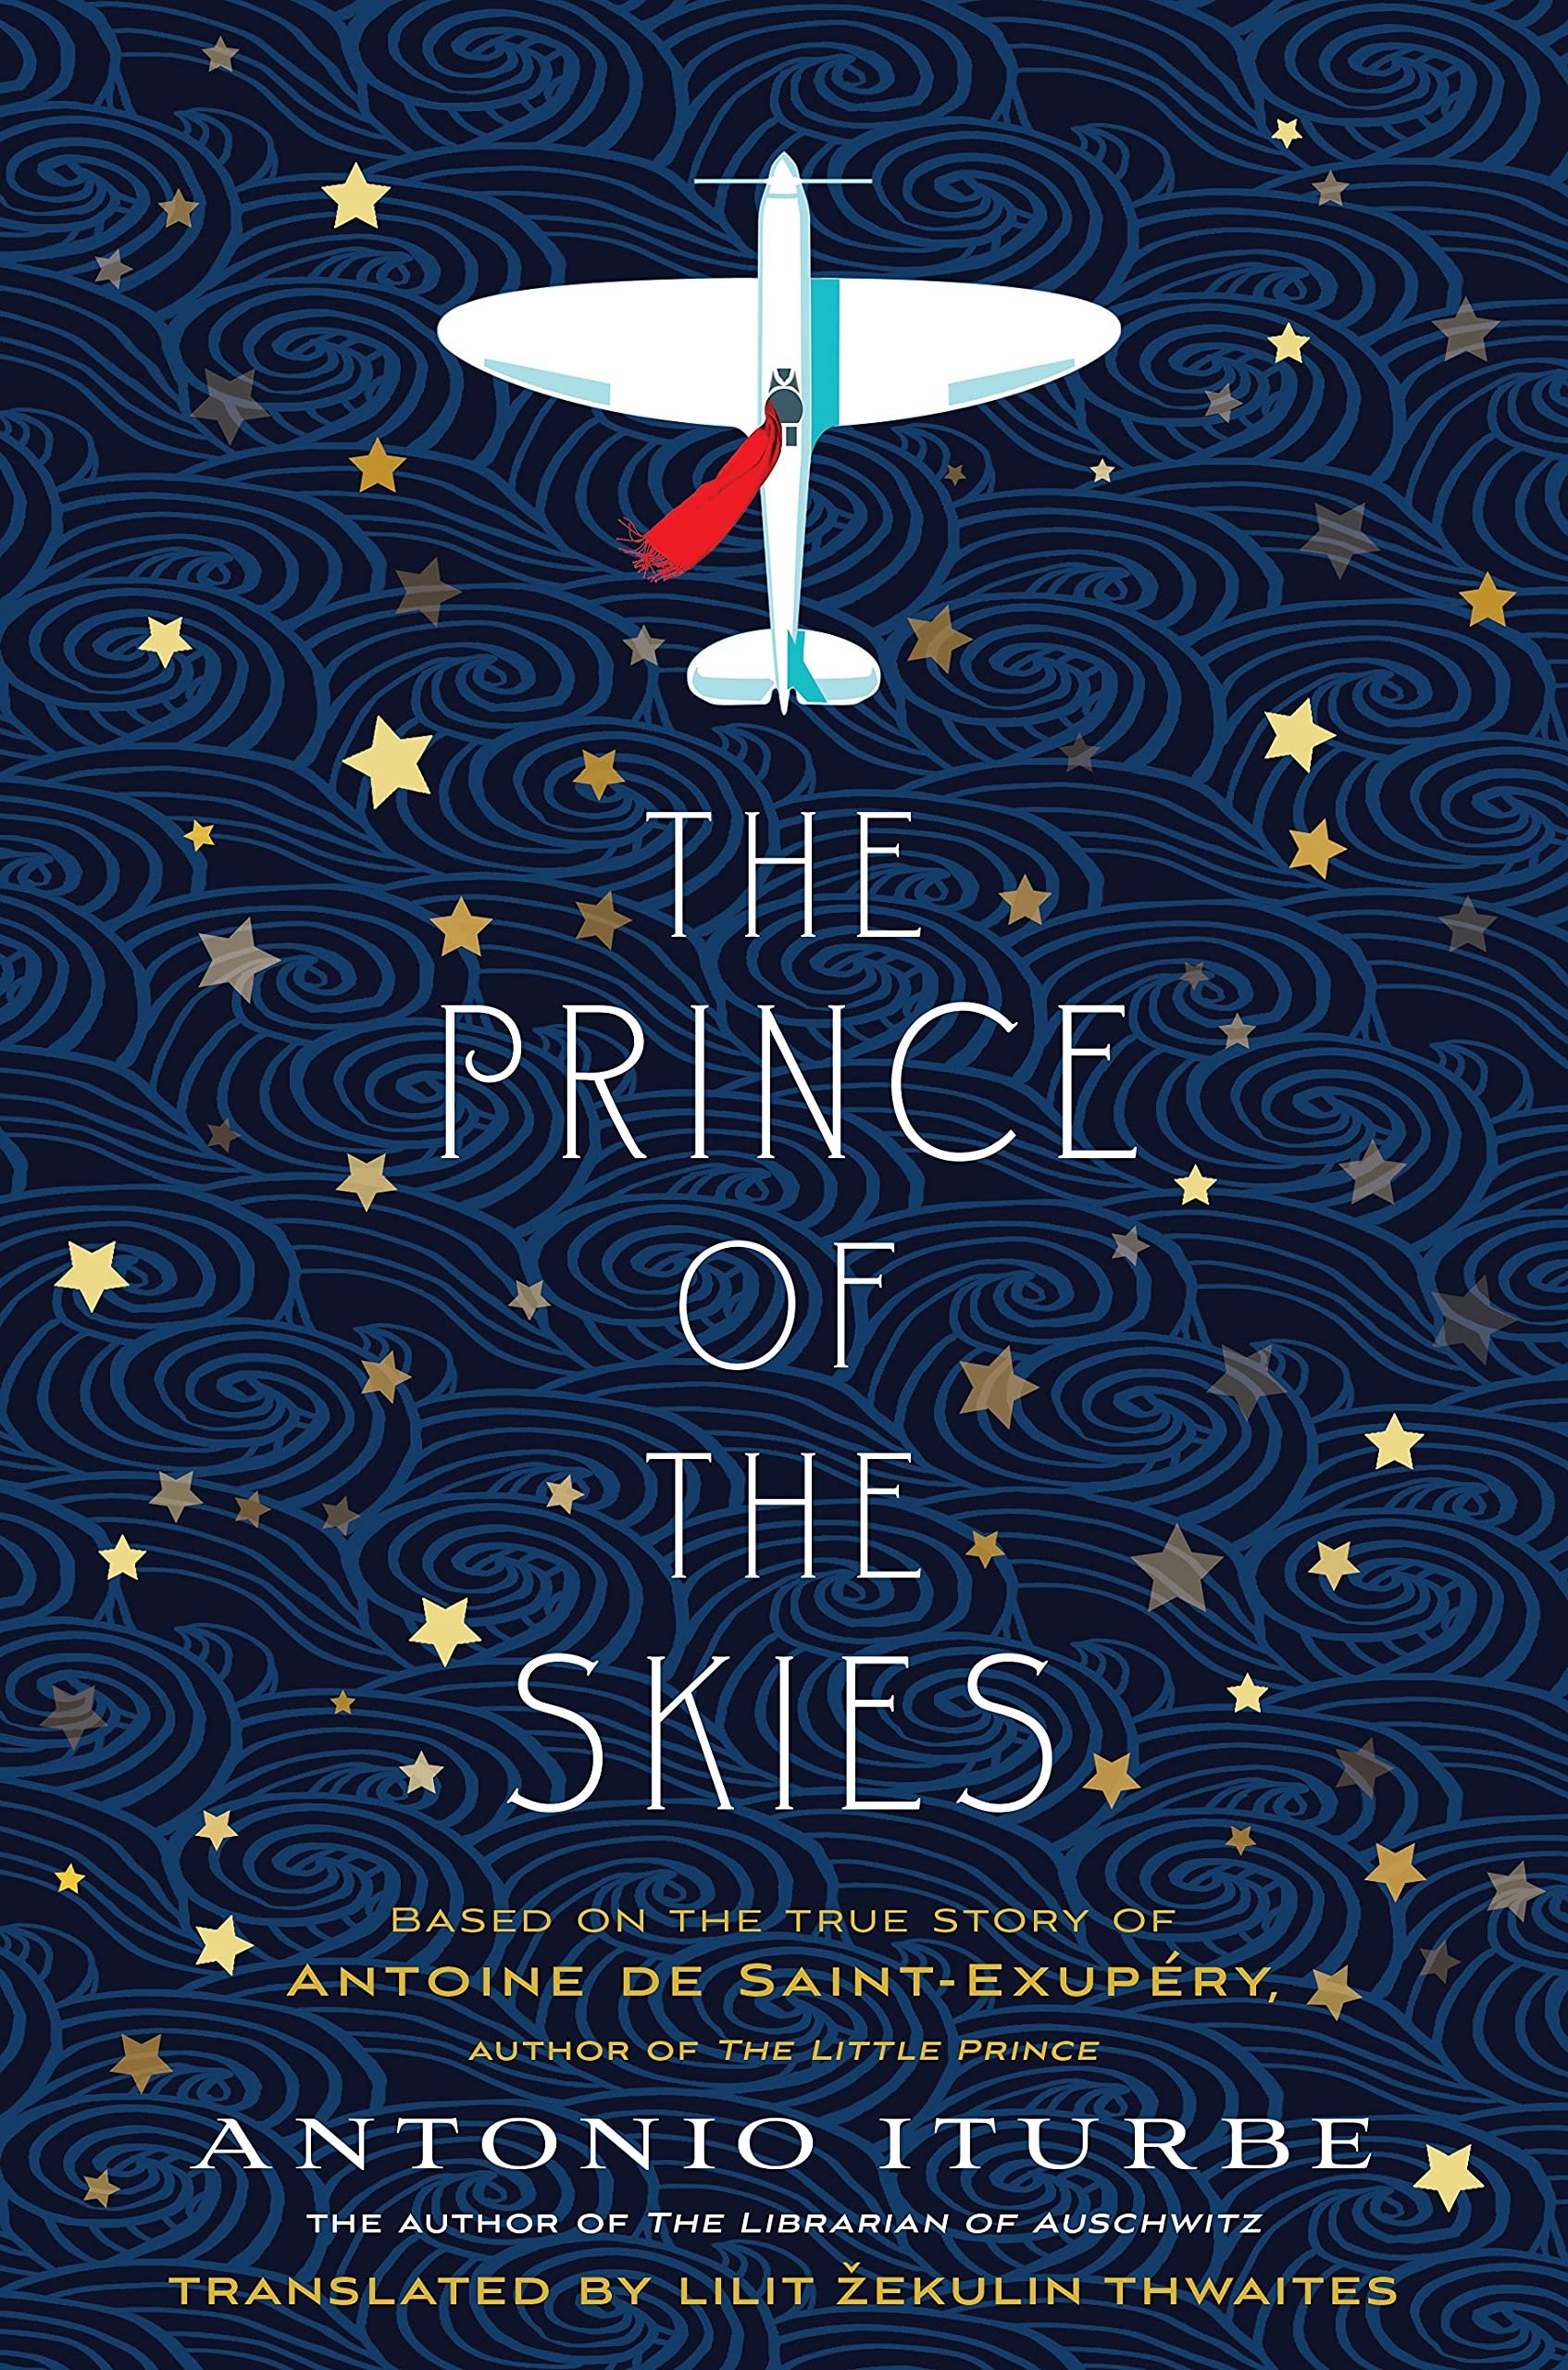 The Prince Of The Skies (Eng) / Antonio Iturbe , Translated by Lilit Thwaites (Author)